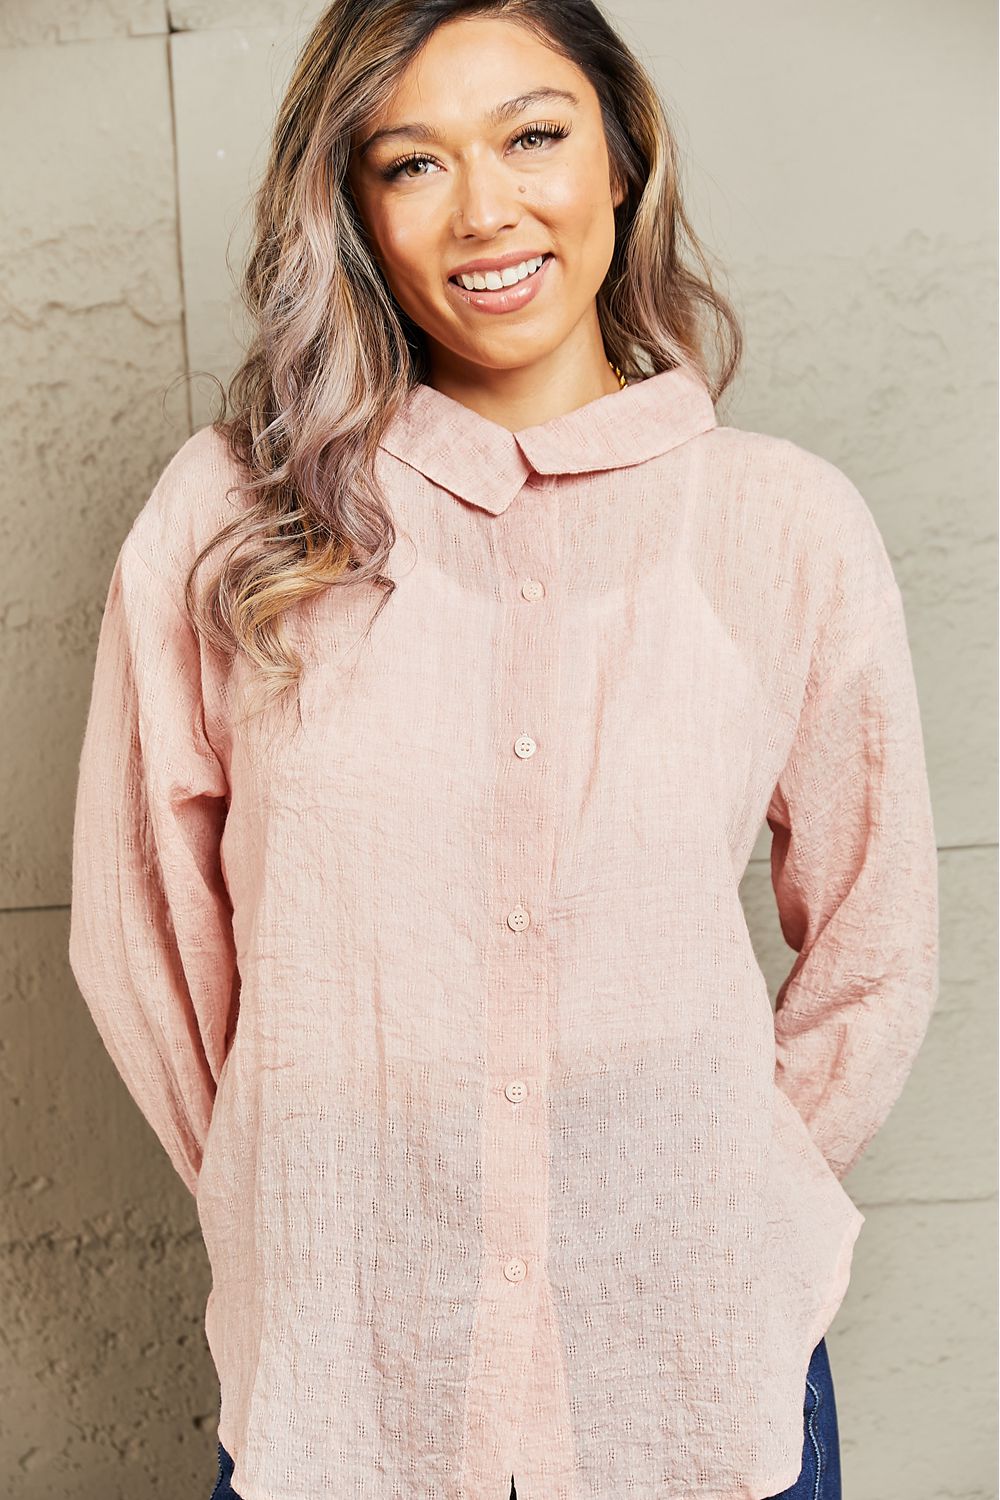 Take Me Out Lightweight Button Down Top - Women’s Clothing & Accessories - Shirts & Tops - 5 - 2024